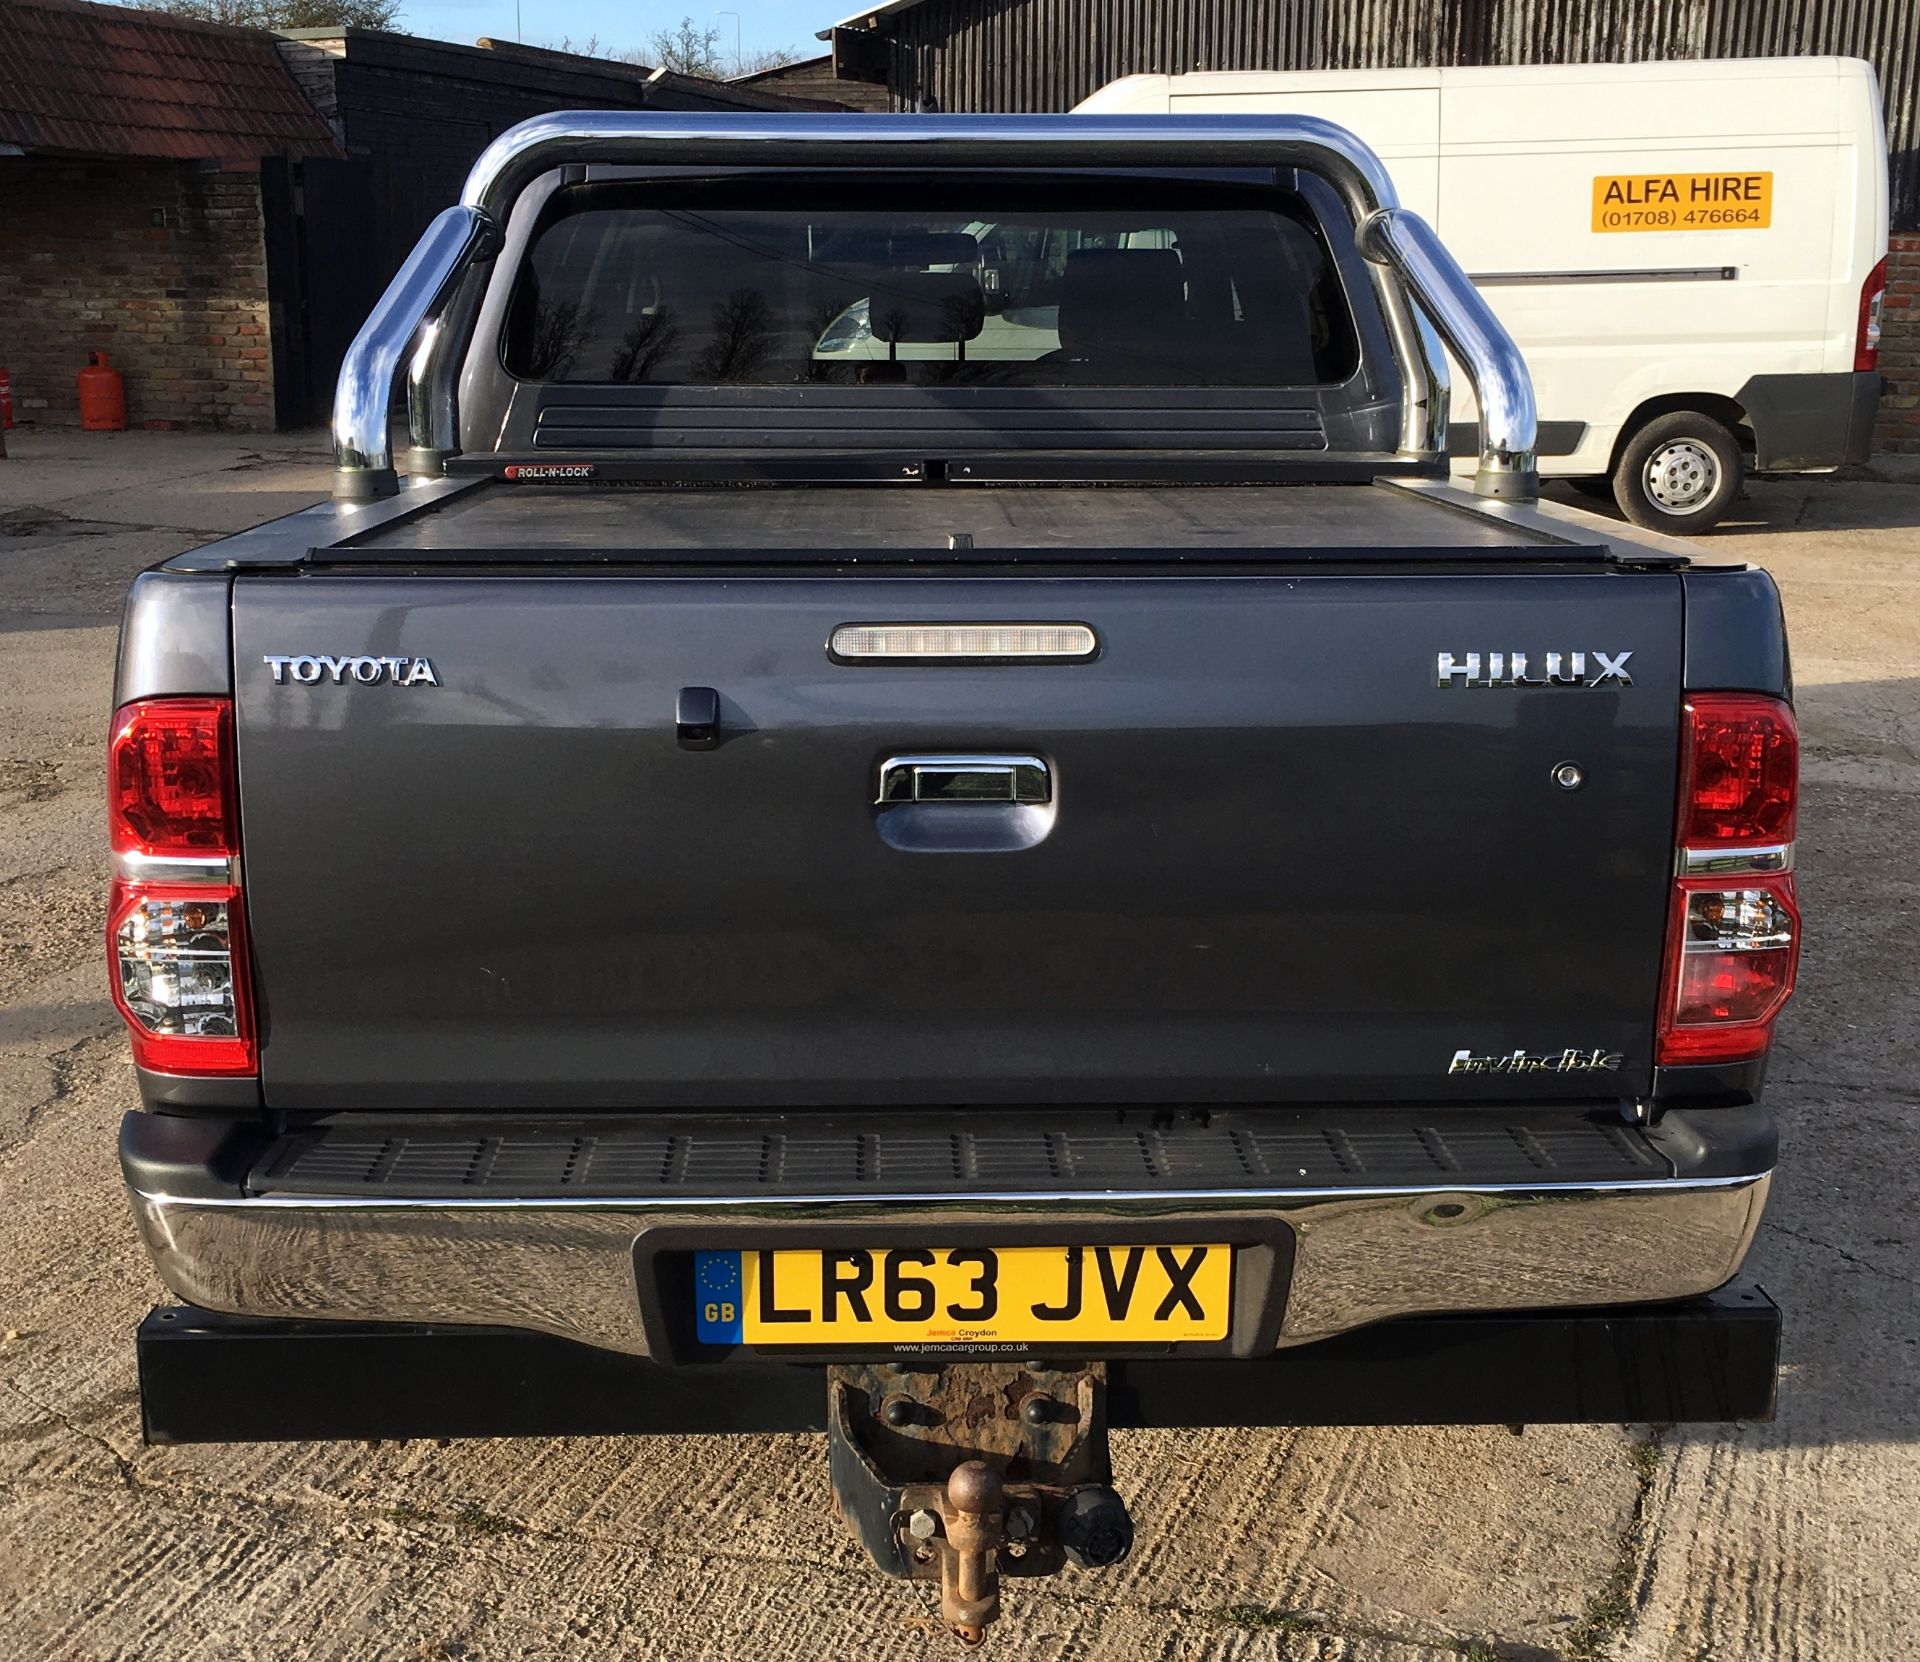 Toyota Hilux Invincible Double Cab D-4D 4WD 171 Auto, LR63 JVX, First Registered 10th October - Image 6 of 10